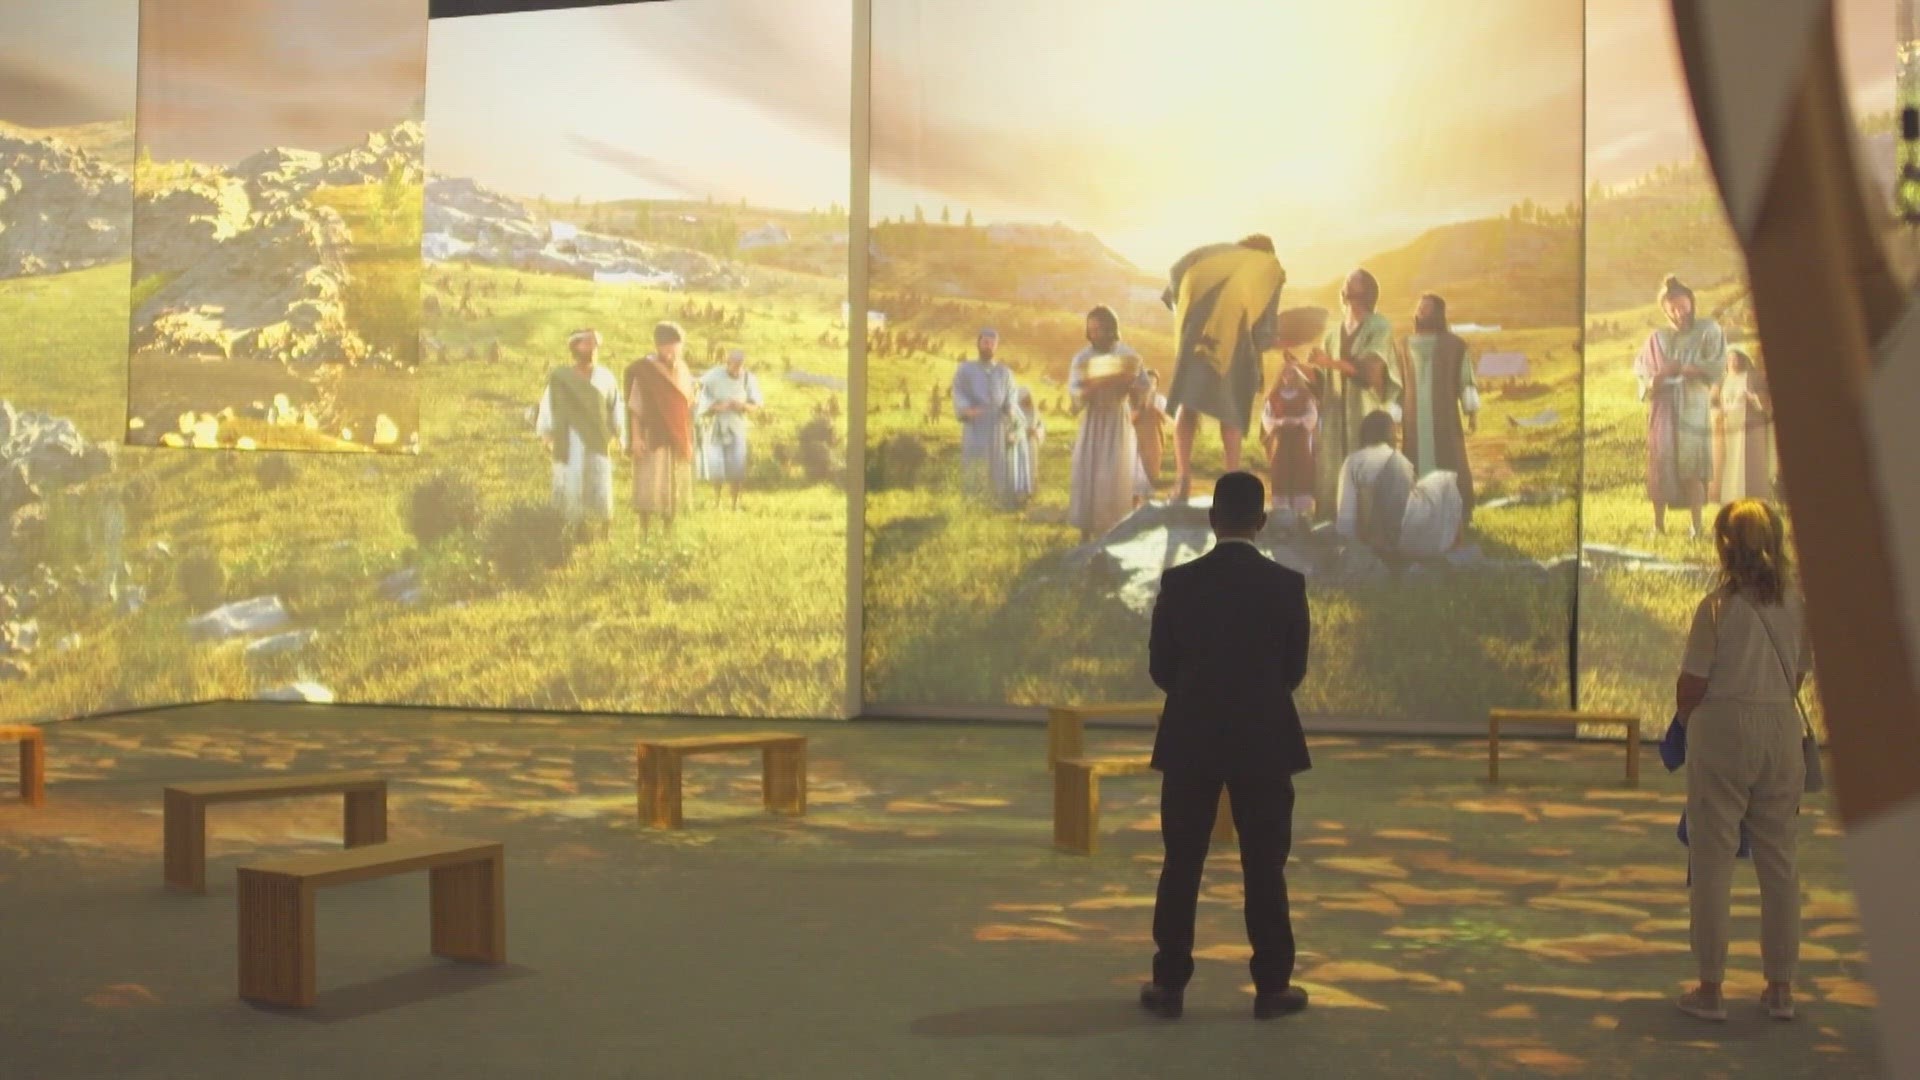 'Nazarene Experience' gives immersive look into Jesus' story